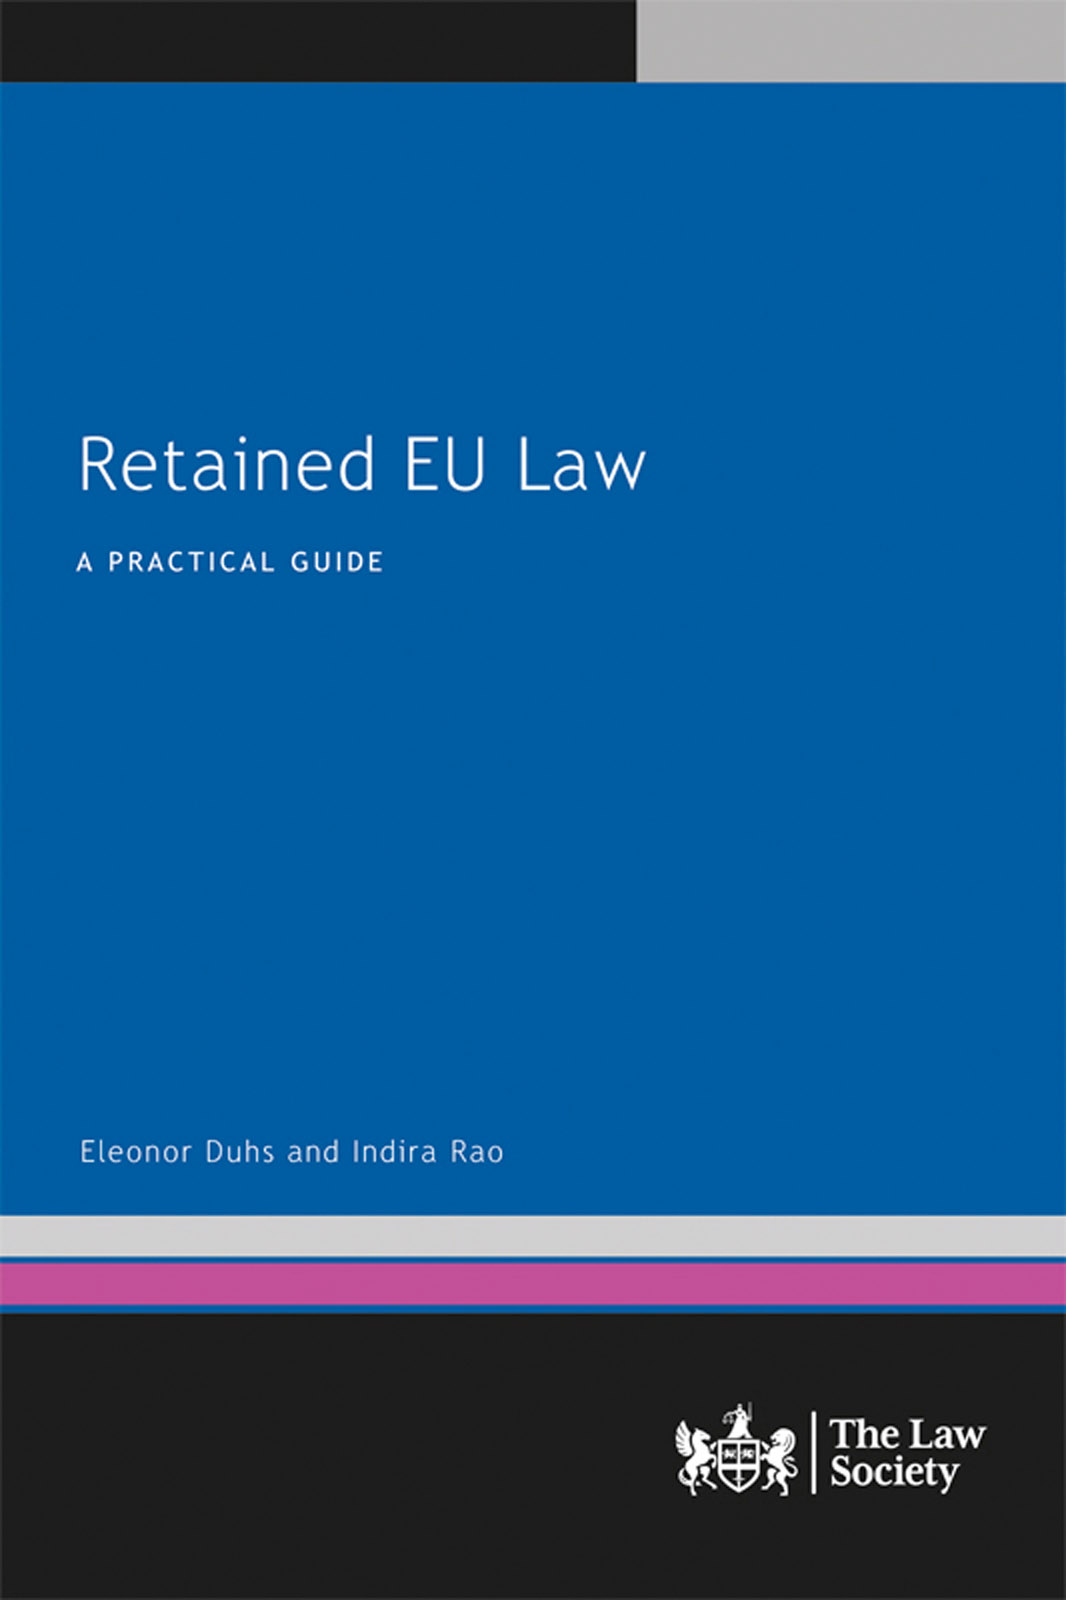 Cover: Retained EU Law a practical guide by Eleonor Duhs and Indria Rao